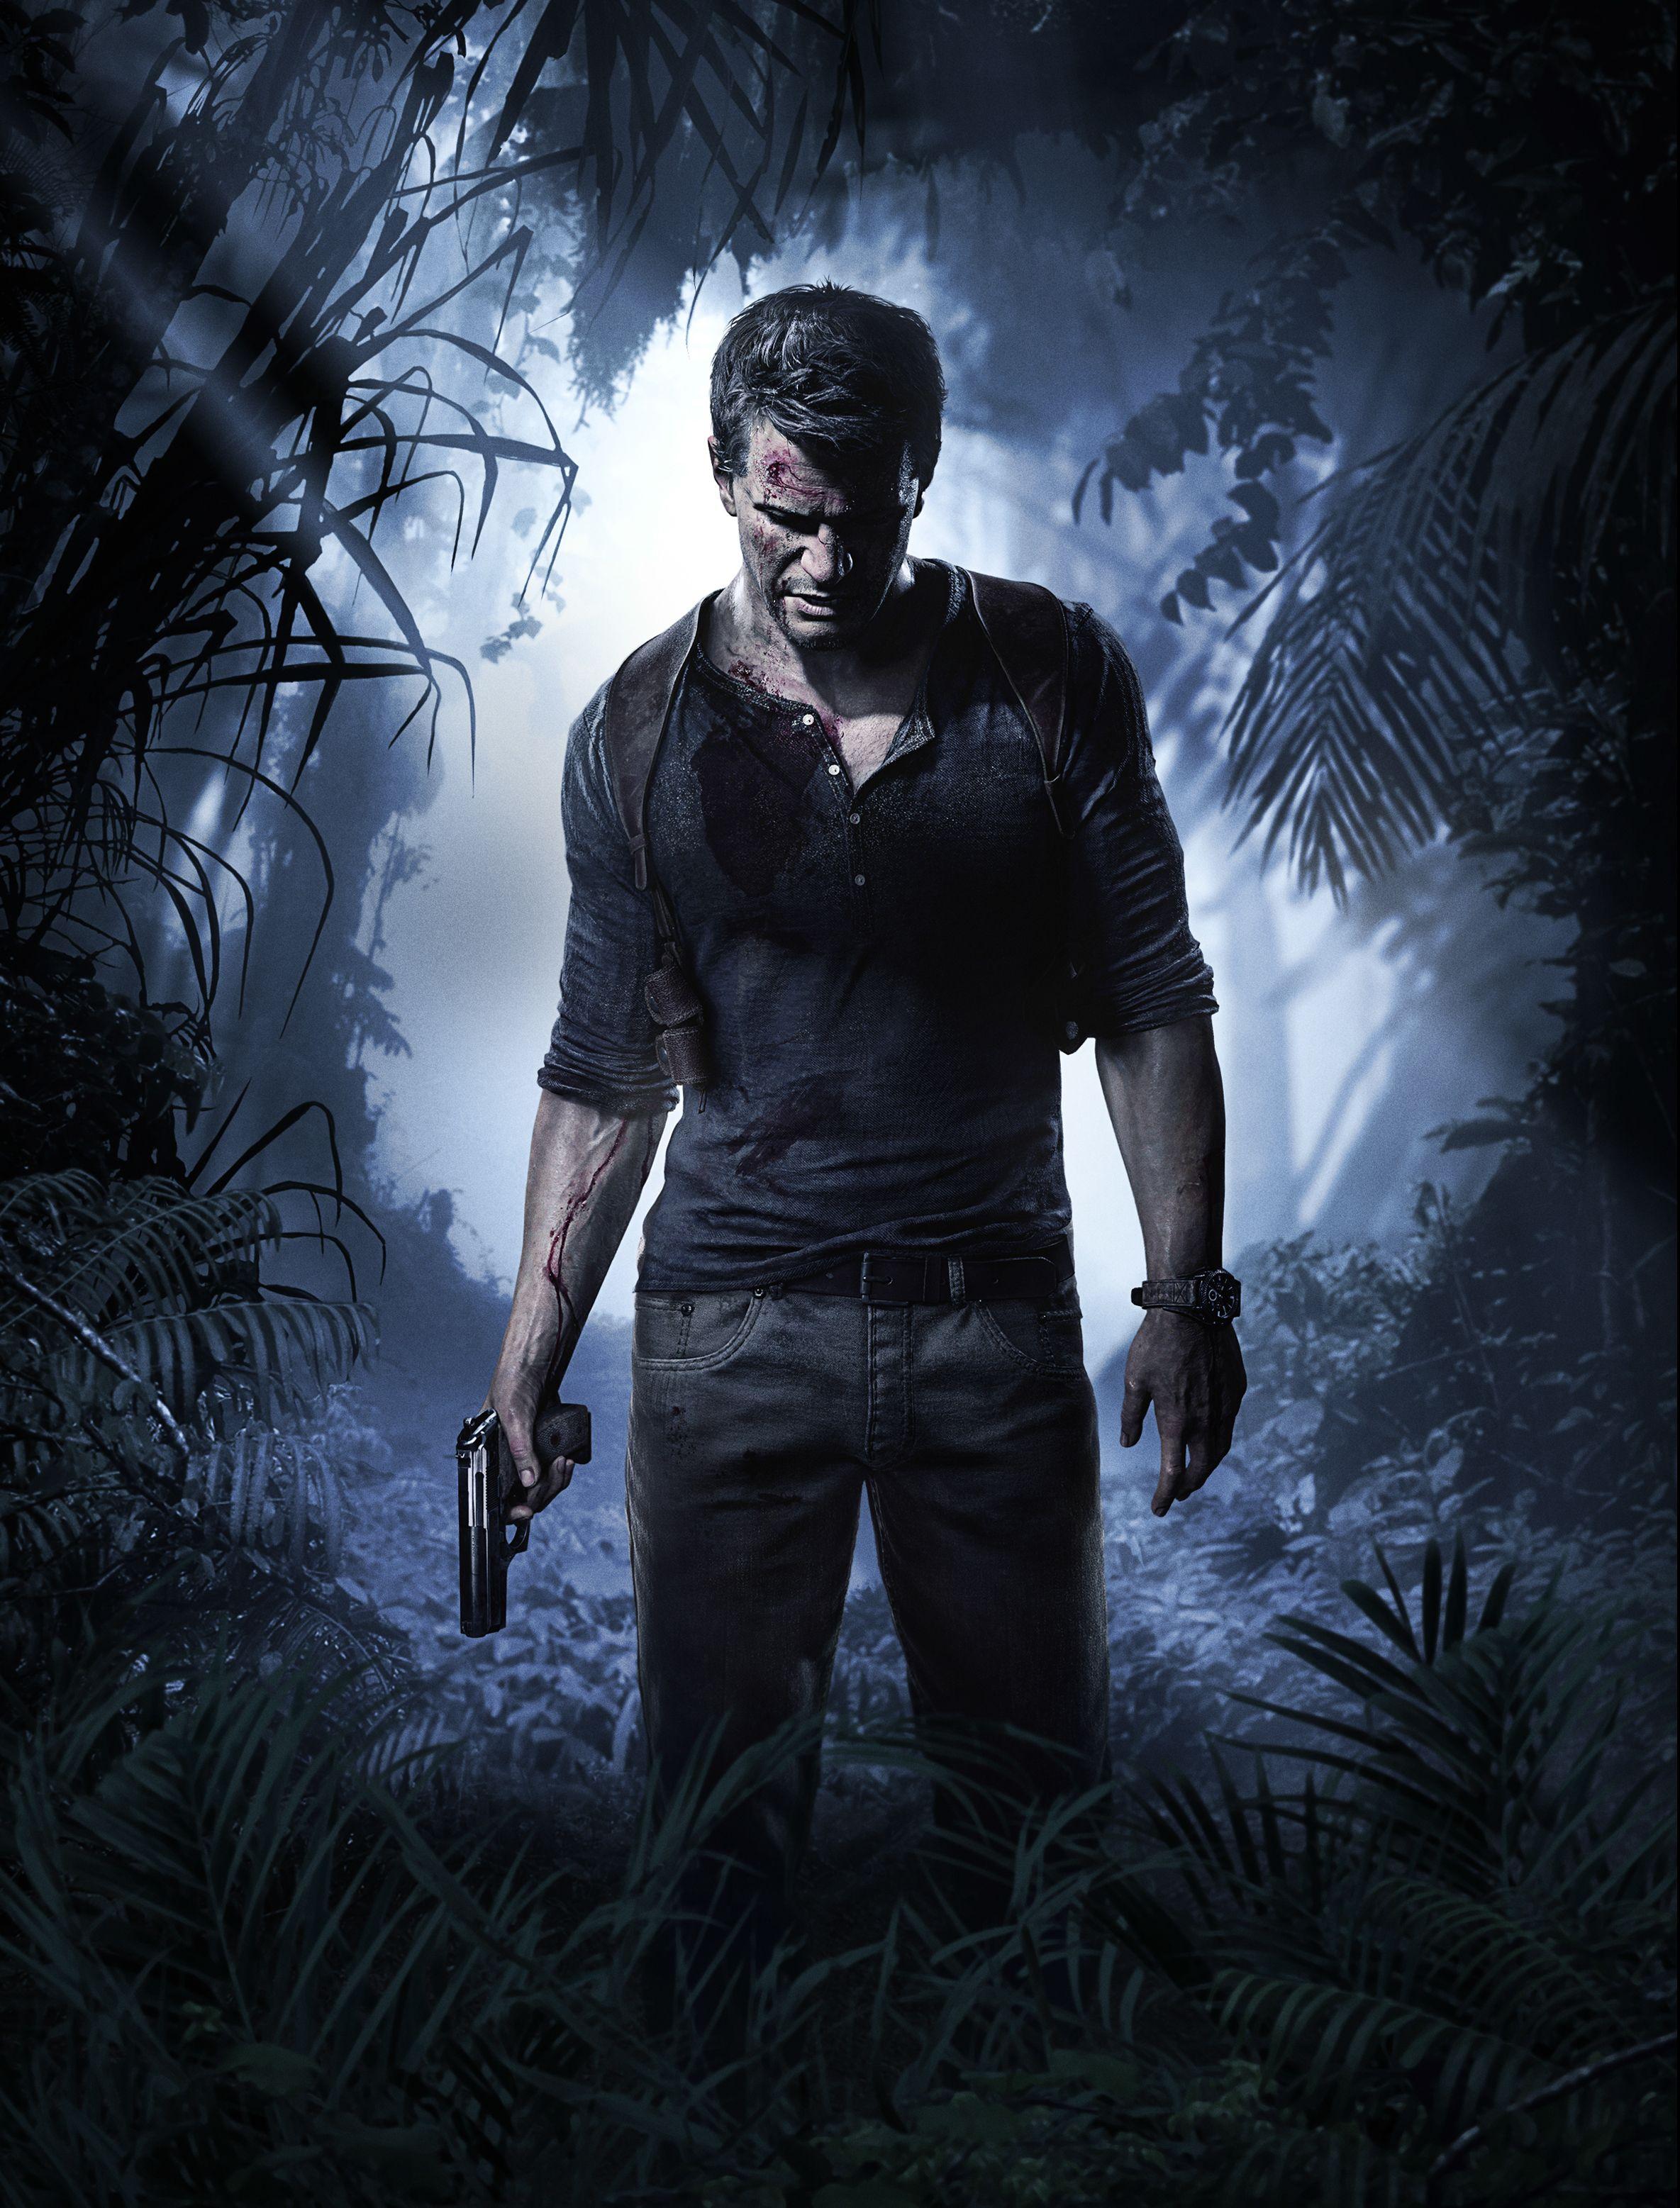 Is This the Final Cover Art for Uncharted 4: A Thief's End on PS4?